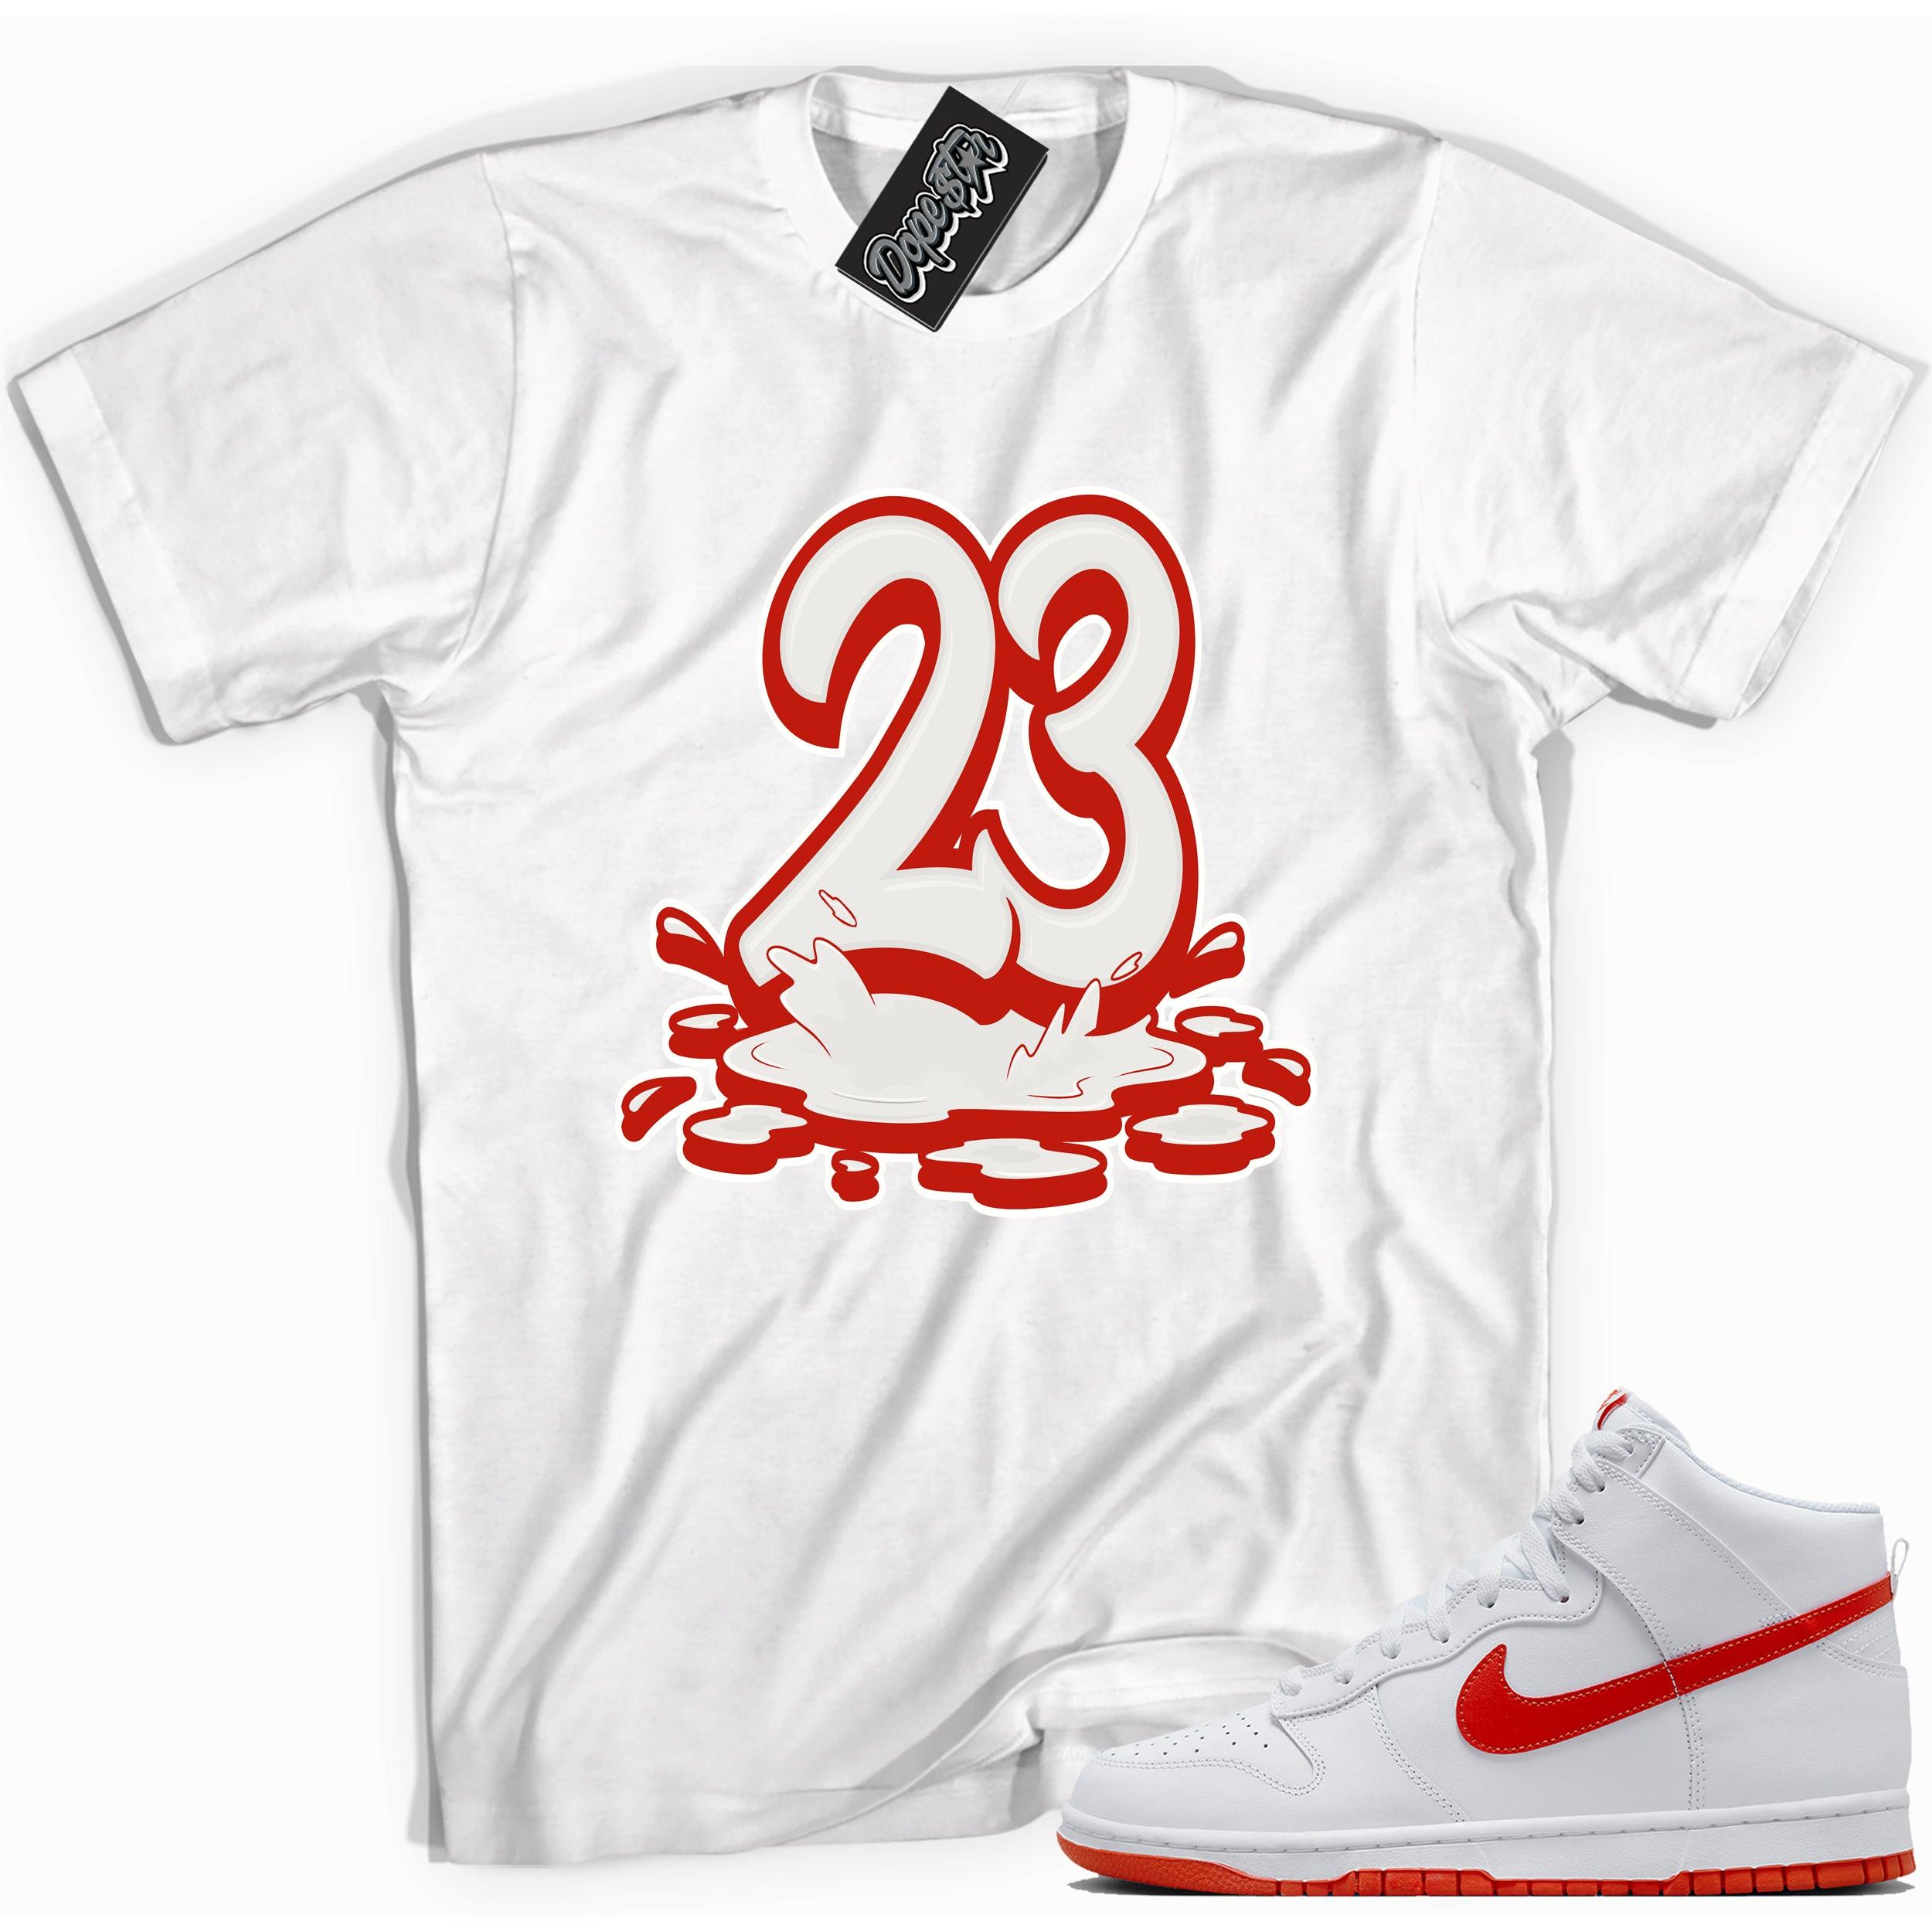 Cool white graphic tee with '23 melting' print, that perfectly matches Nike Dunk High White Picante Red sneakers.